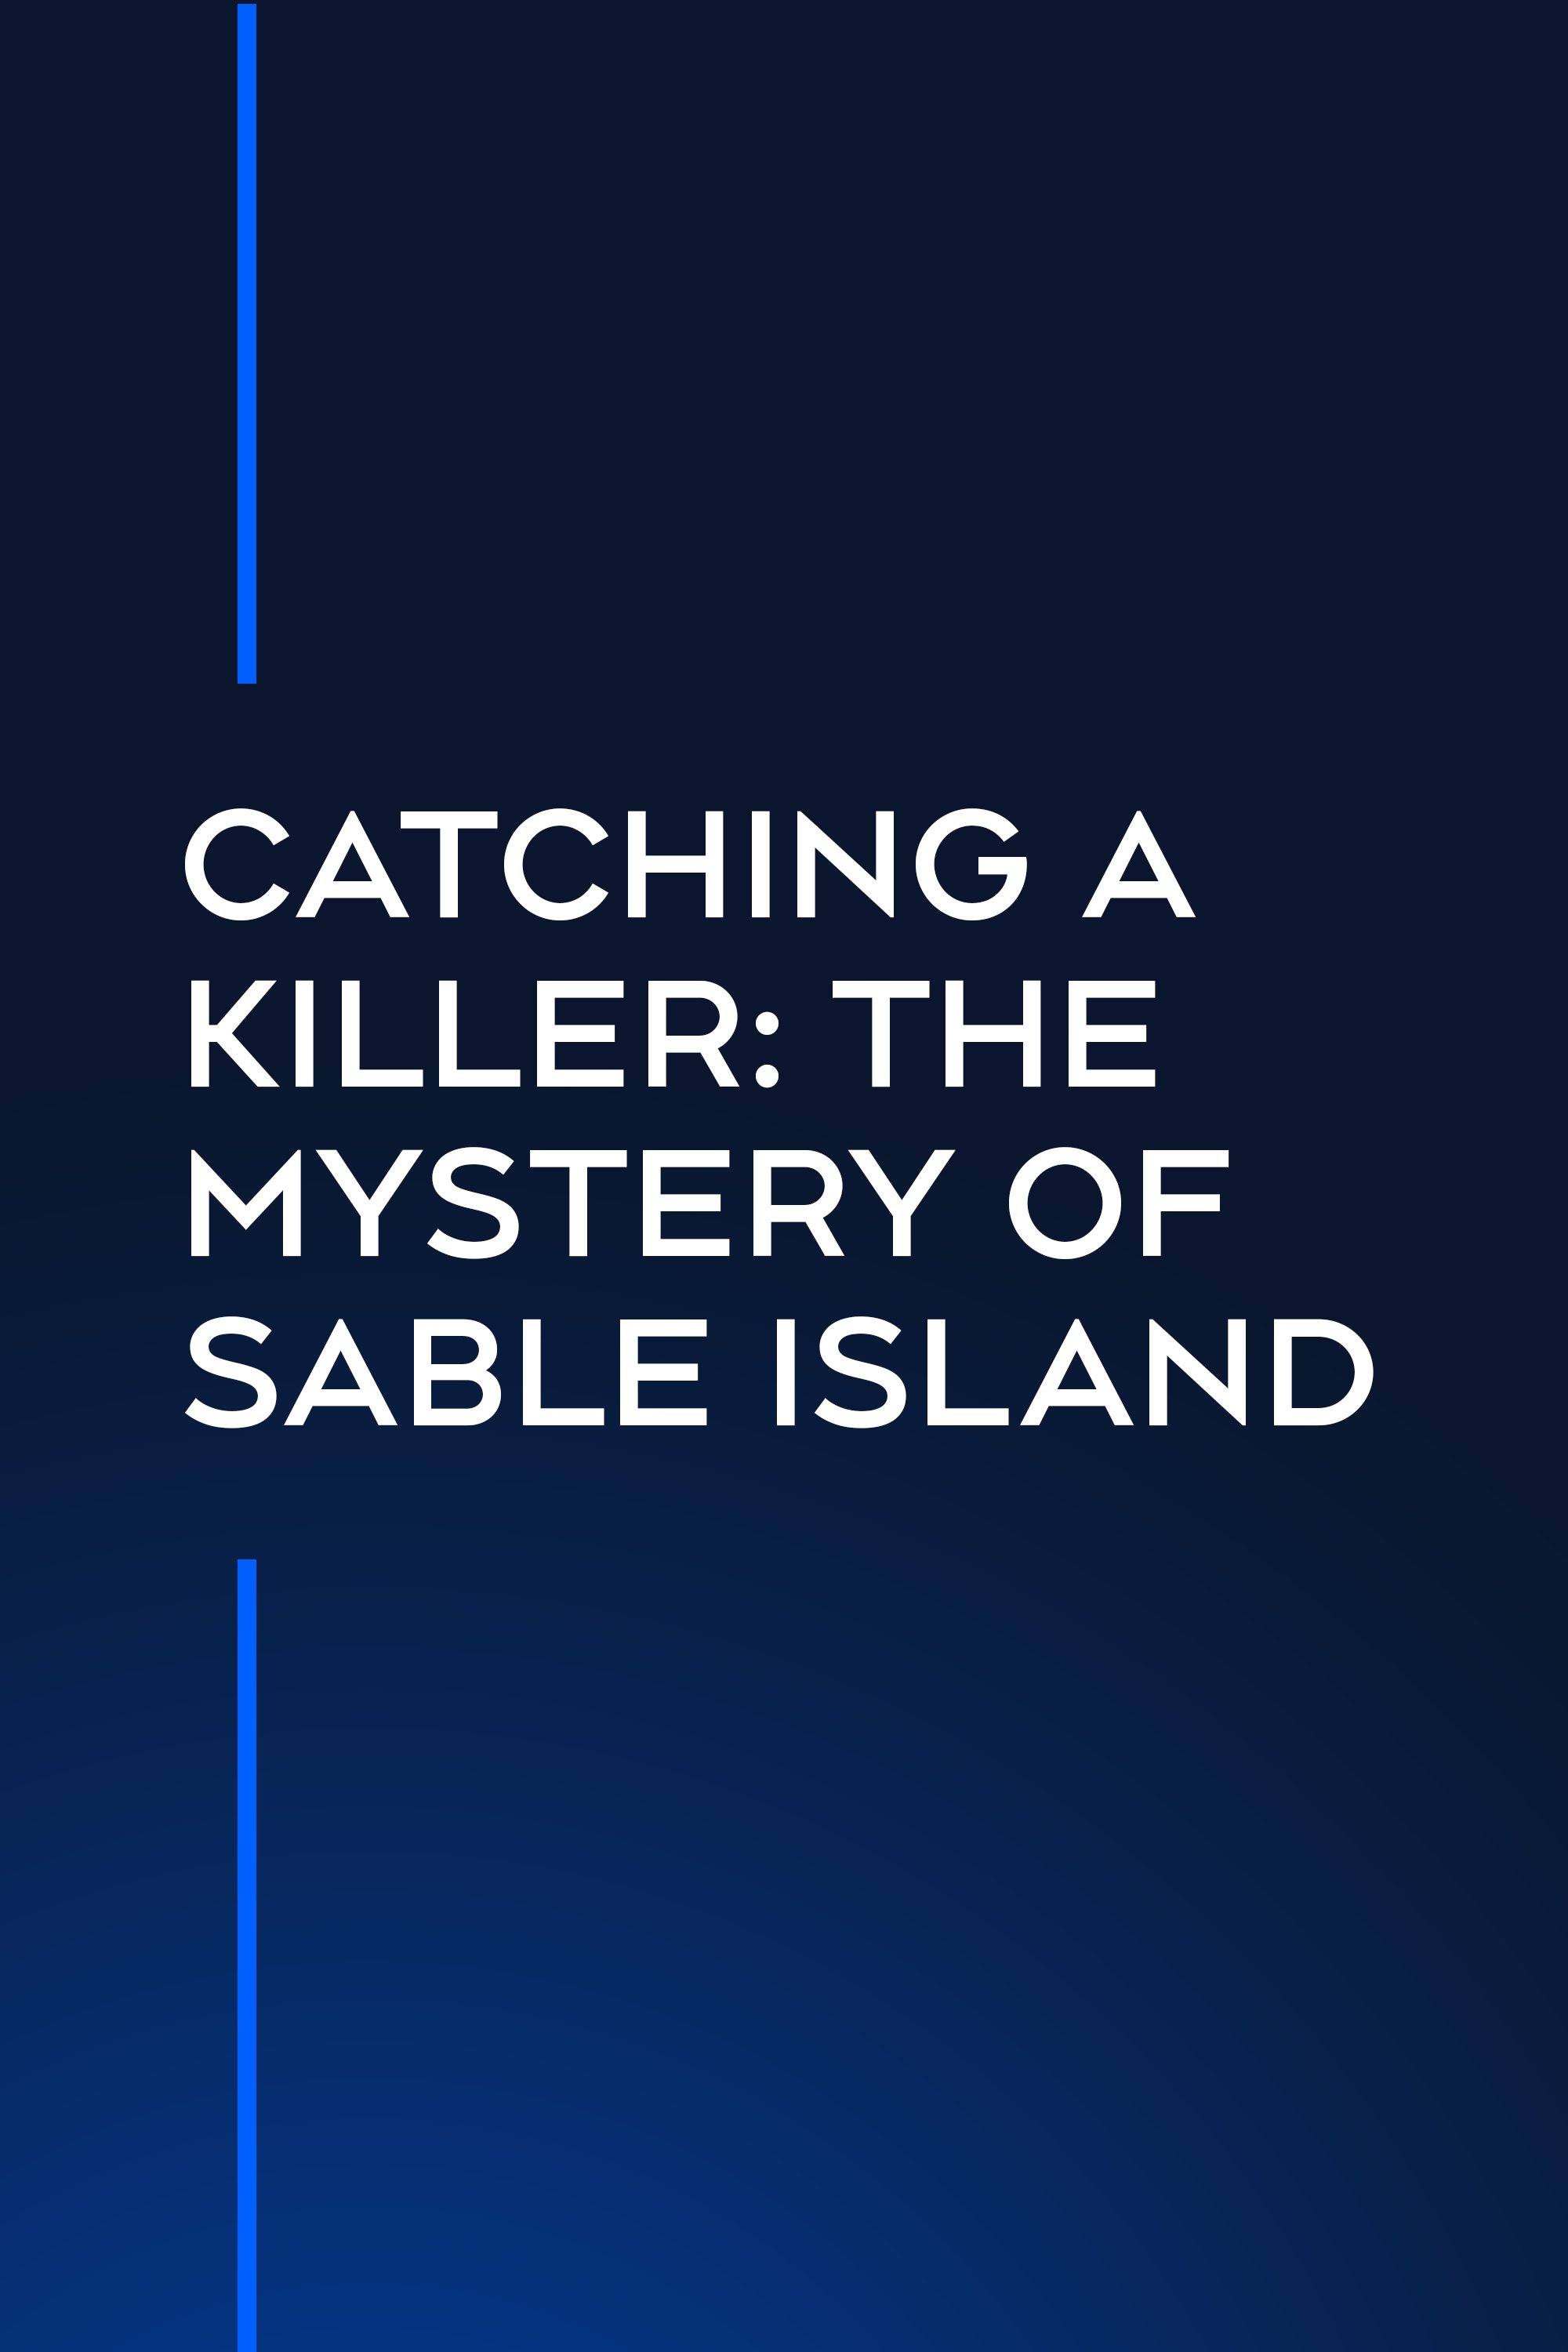 Catching a Killer: The Mystery of Sable Island